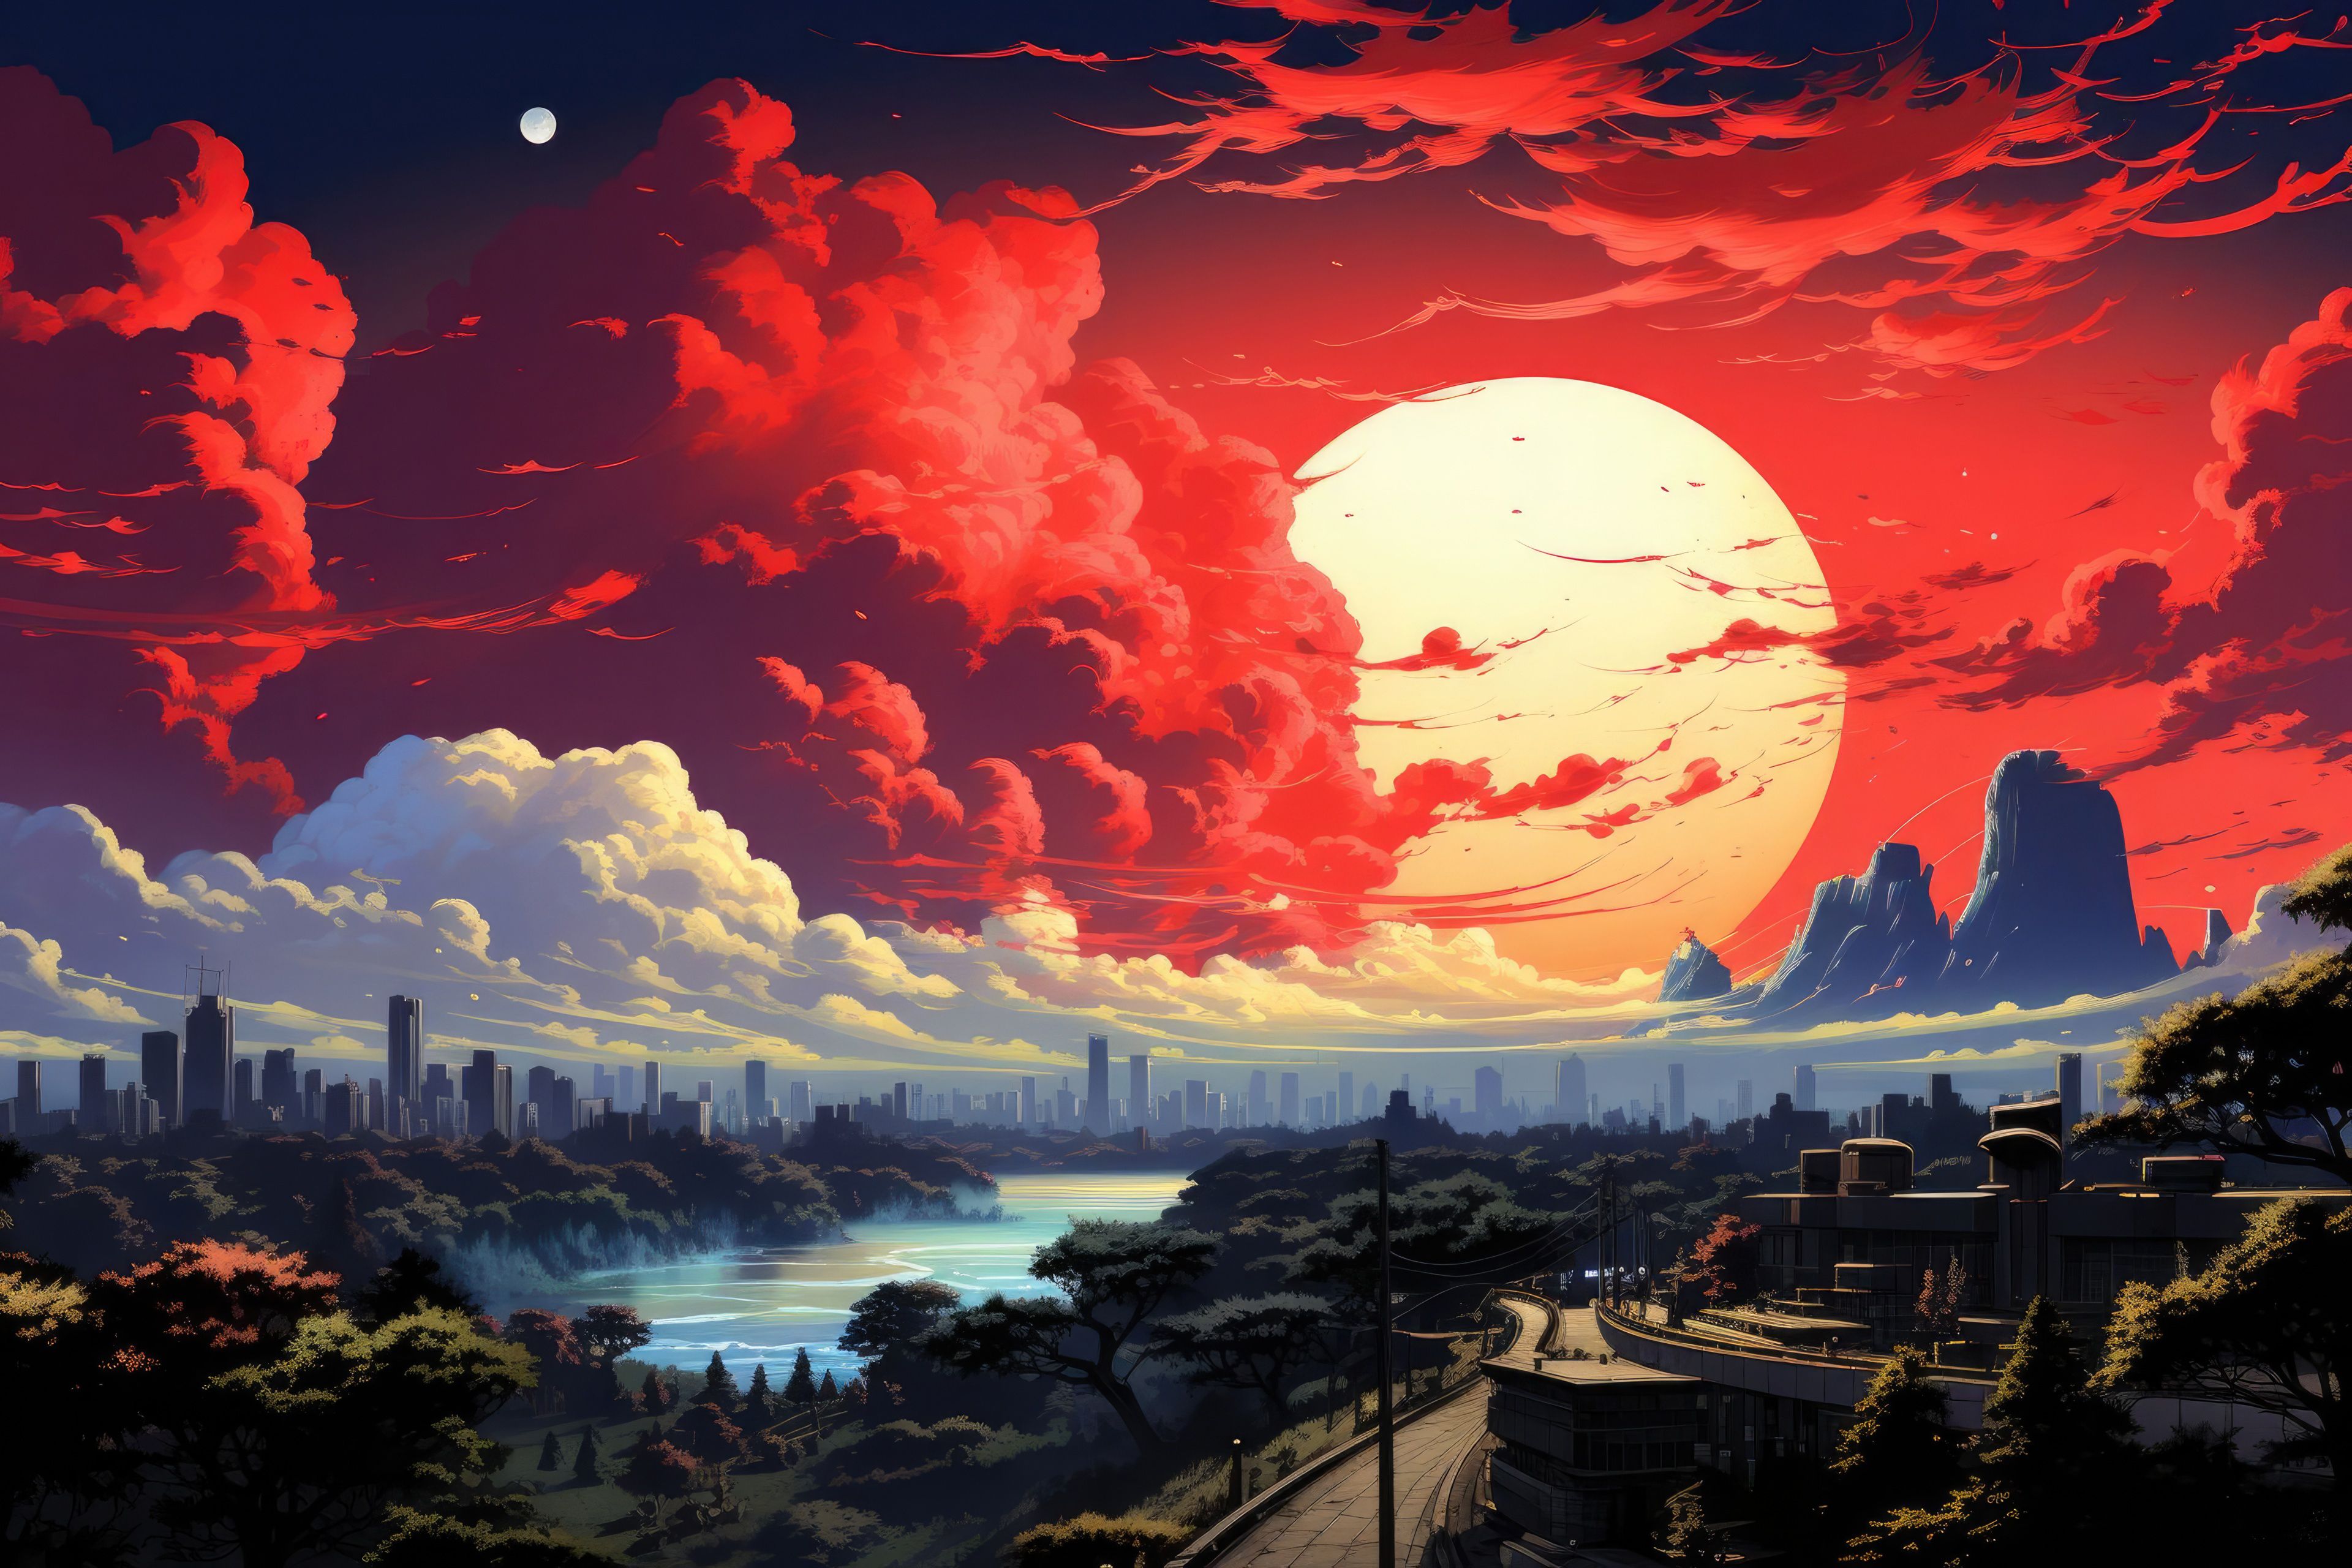 The picture shows a beautiful red sky at sunset, with a large moon in the middle of the sky, the city under the moonlight, and the river flowing through the forest. - Cityscape